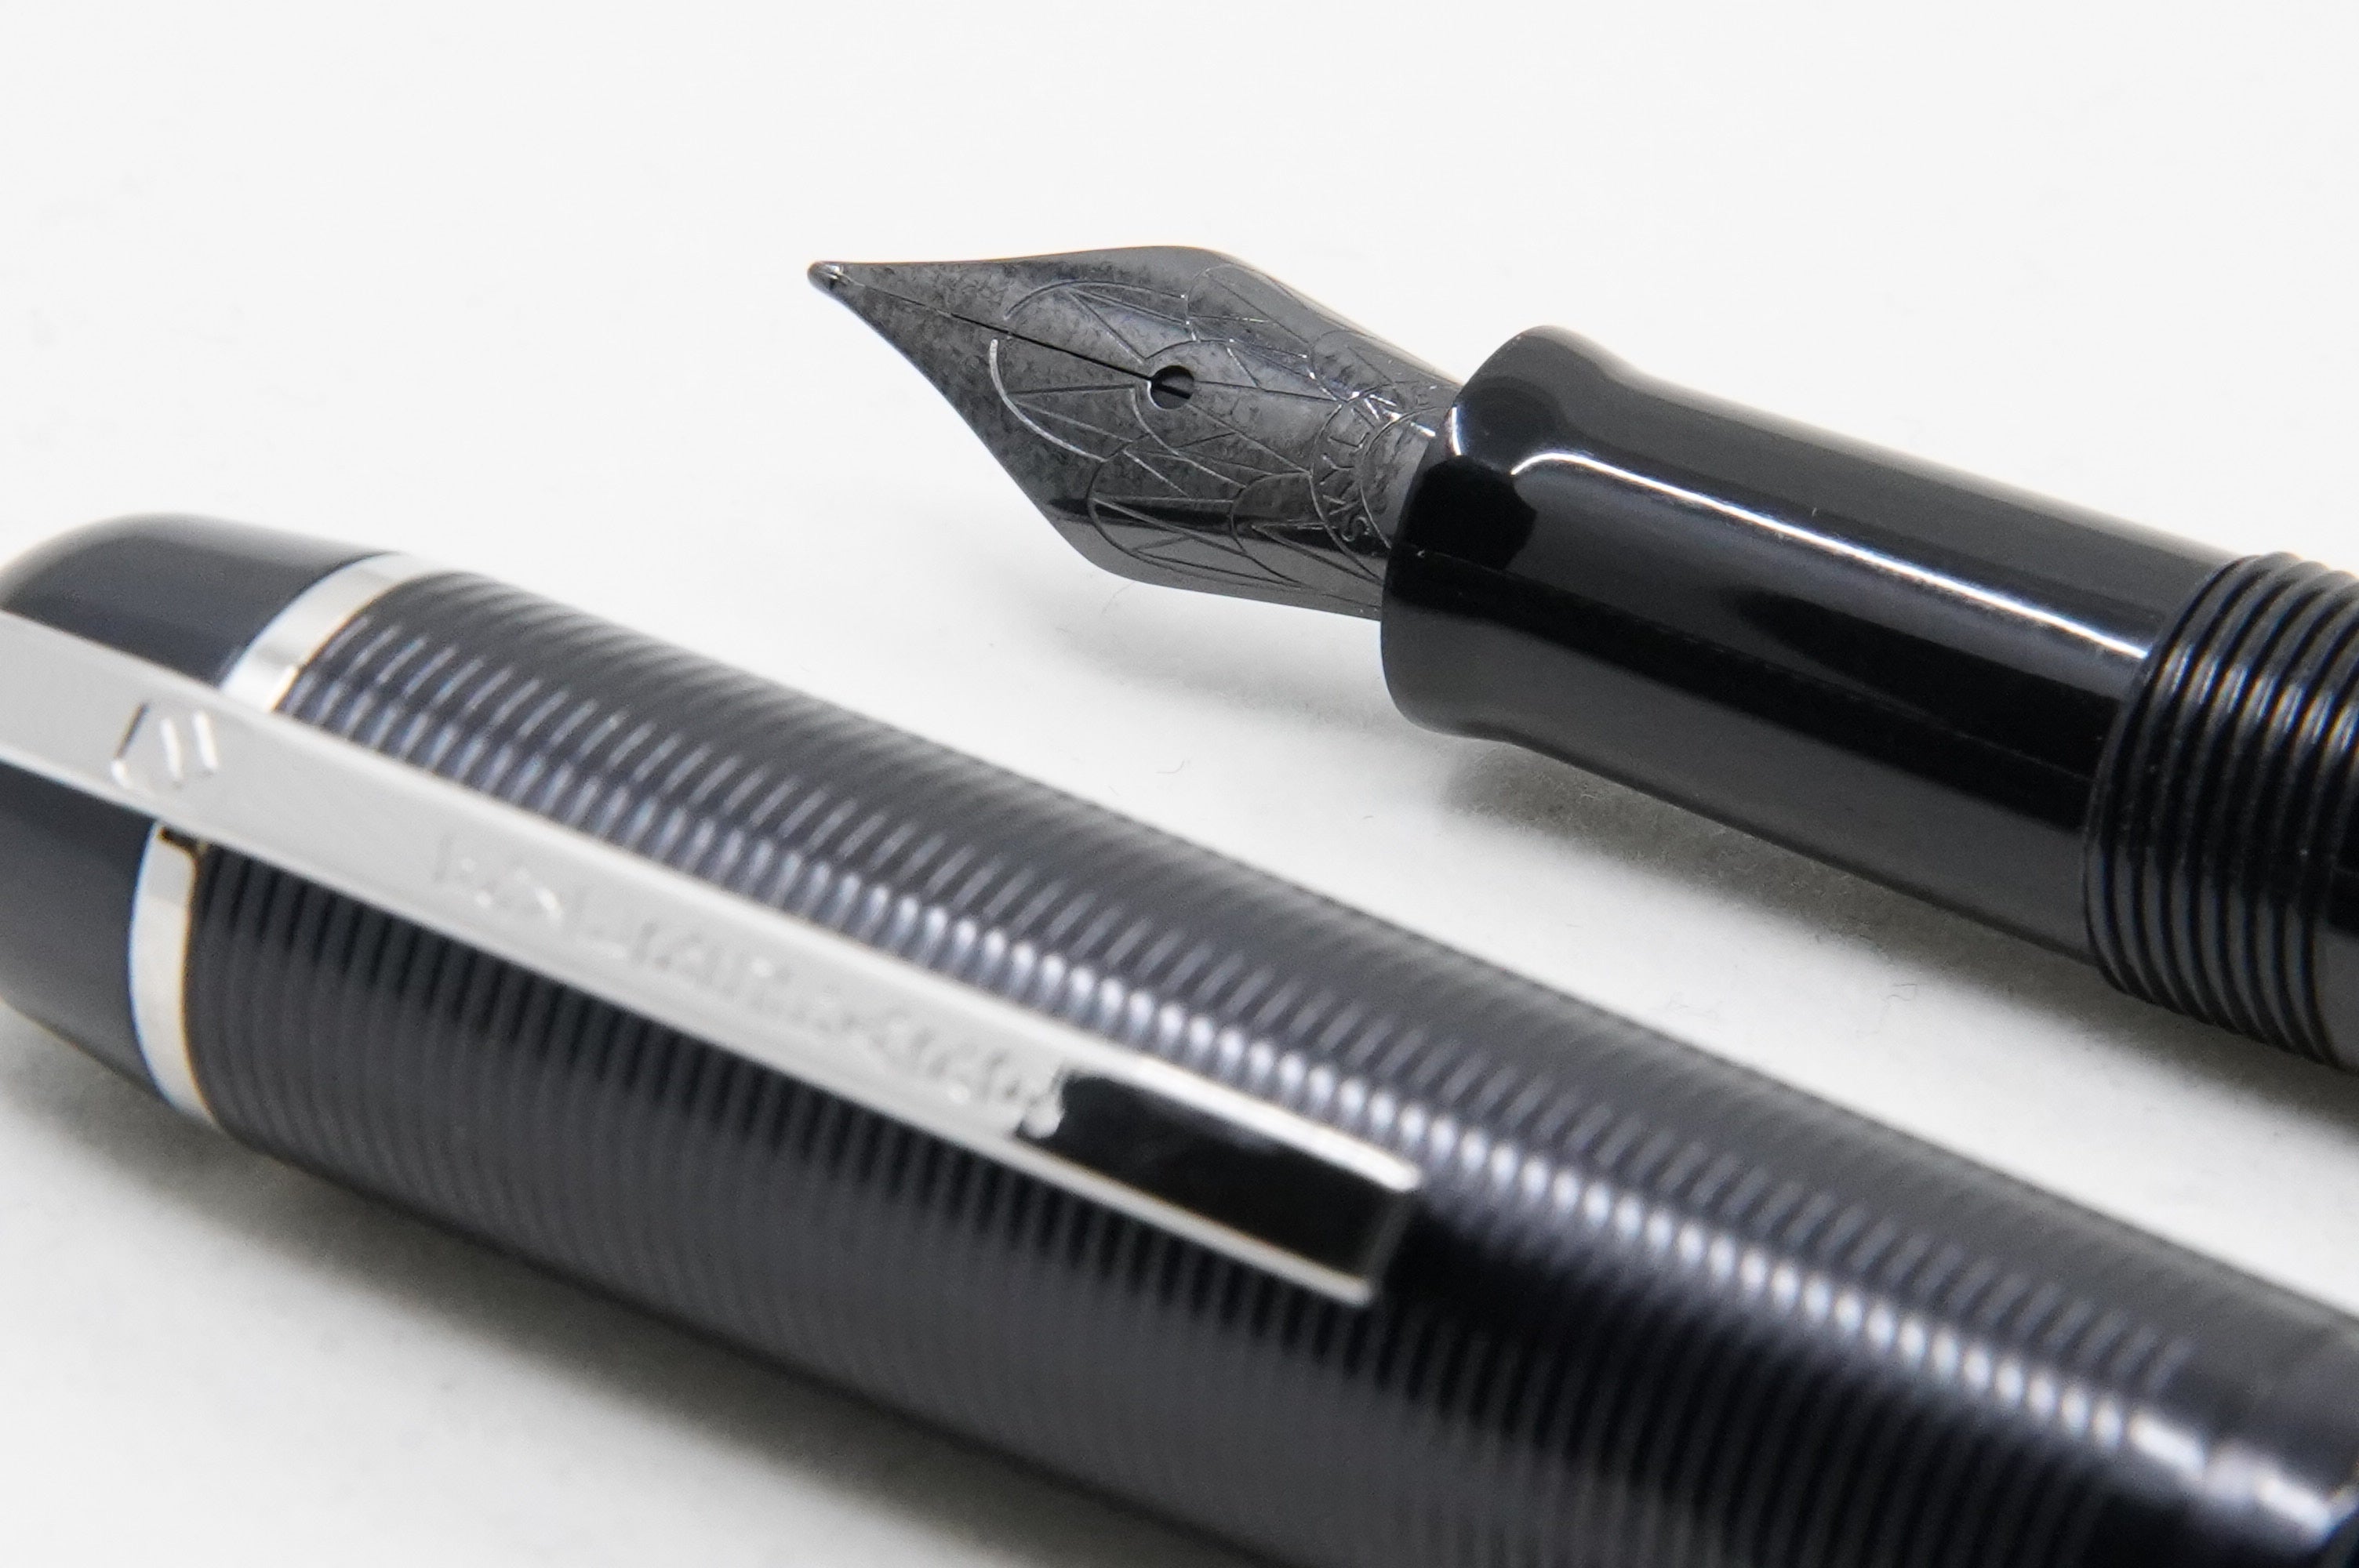 Wahl Eversharp Skyline FP Aluminum Black - The iconic SKYLINE created by Henry Dreyfus in 1939